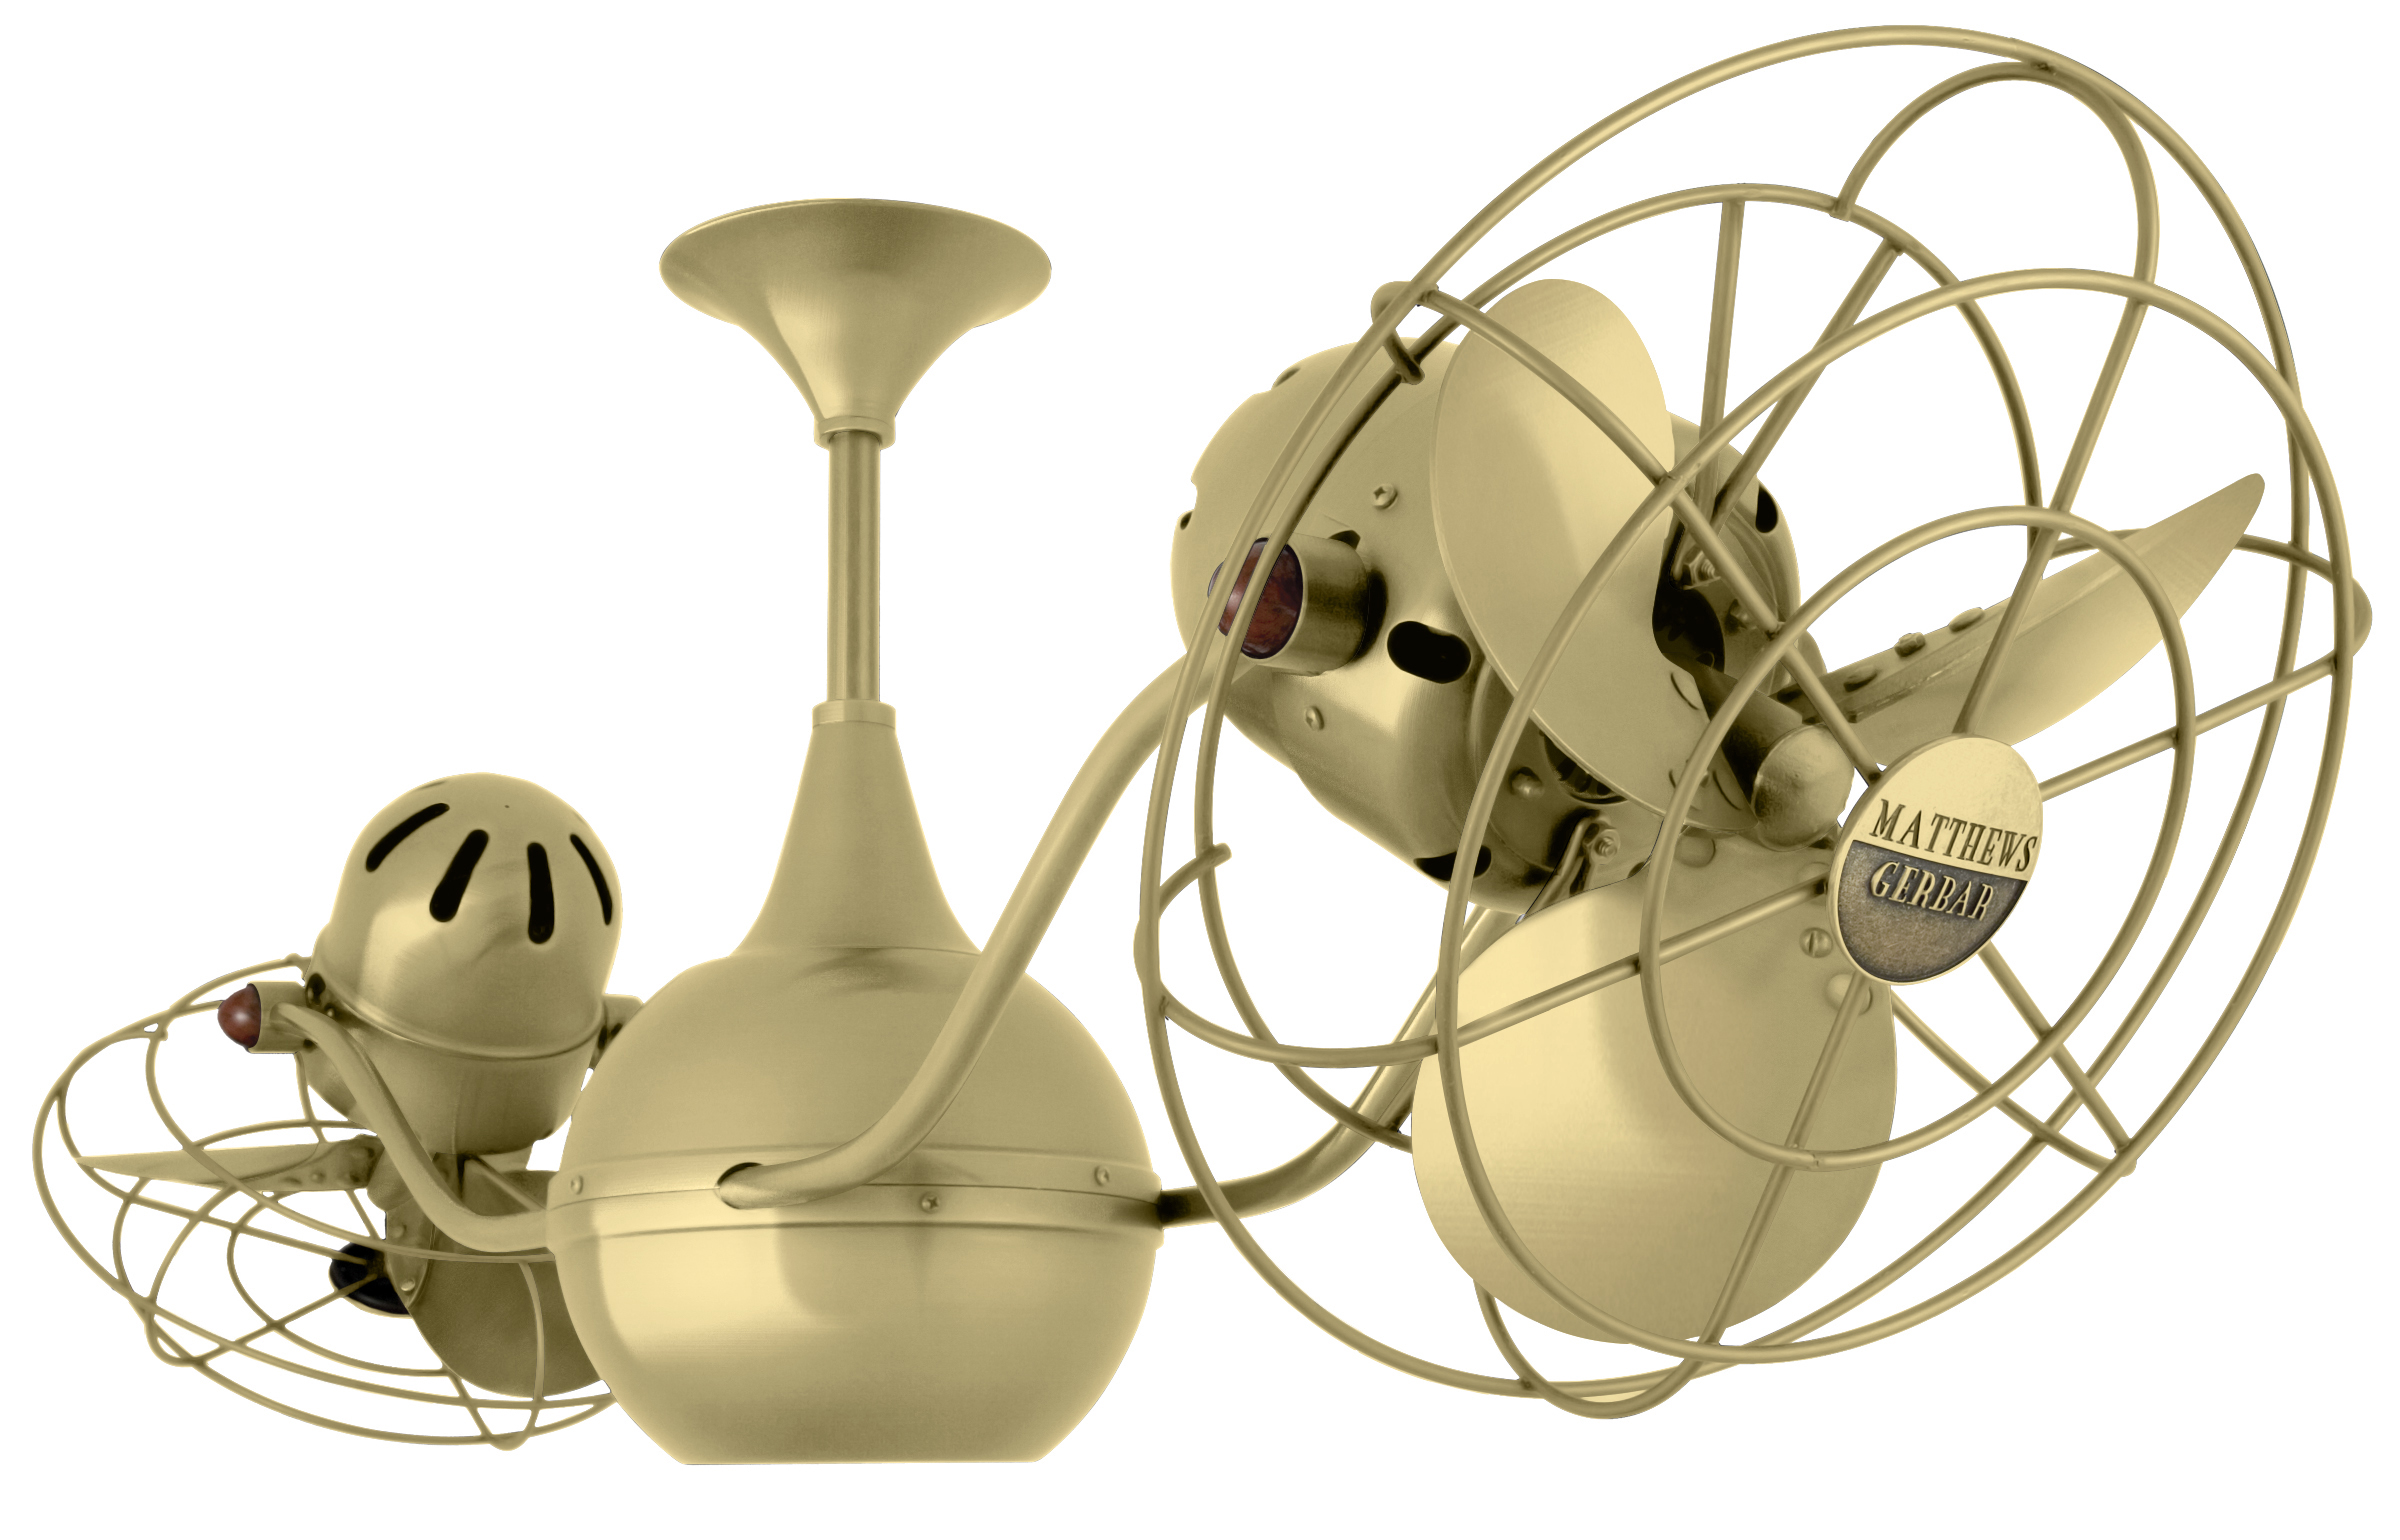 Vent-Bettina Rotational Dual Head Ceiling Fan in Brushed Brass Finish with Metal Blades and Decorative Cage